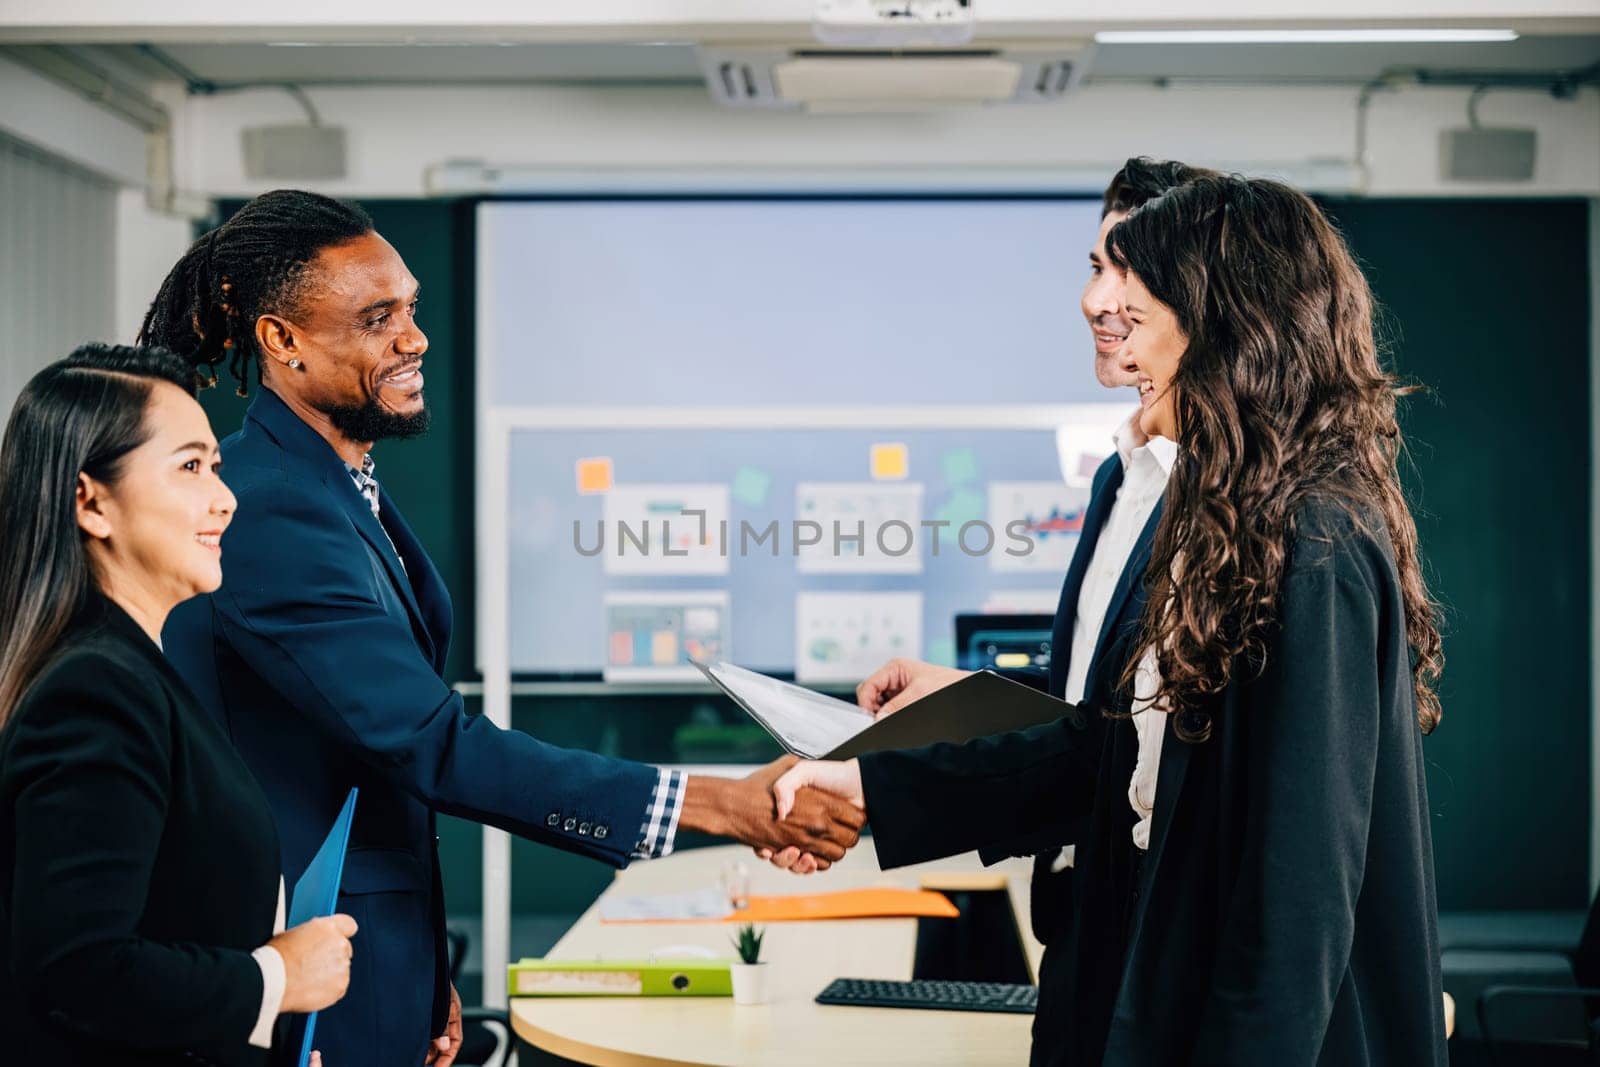 In a meeting, professionals seal a deal with a handshake, demonstrating their successful collaboration and agreement. Executives, lawyers, and managers celebrate their achievement. Teamwork by Sorapop